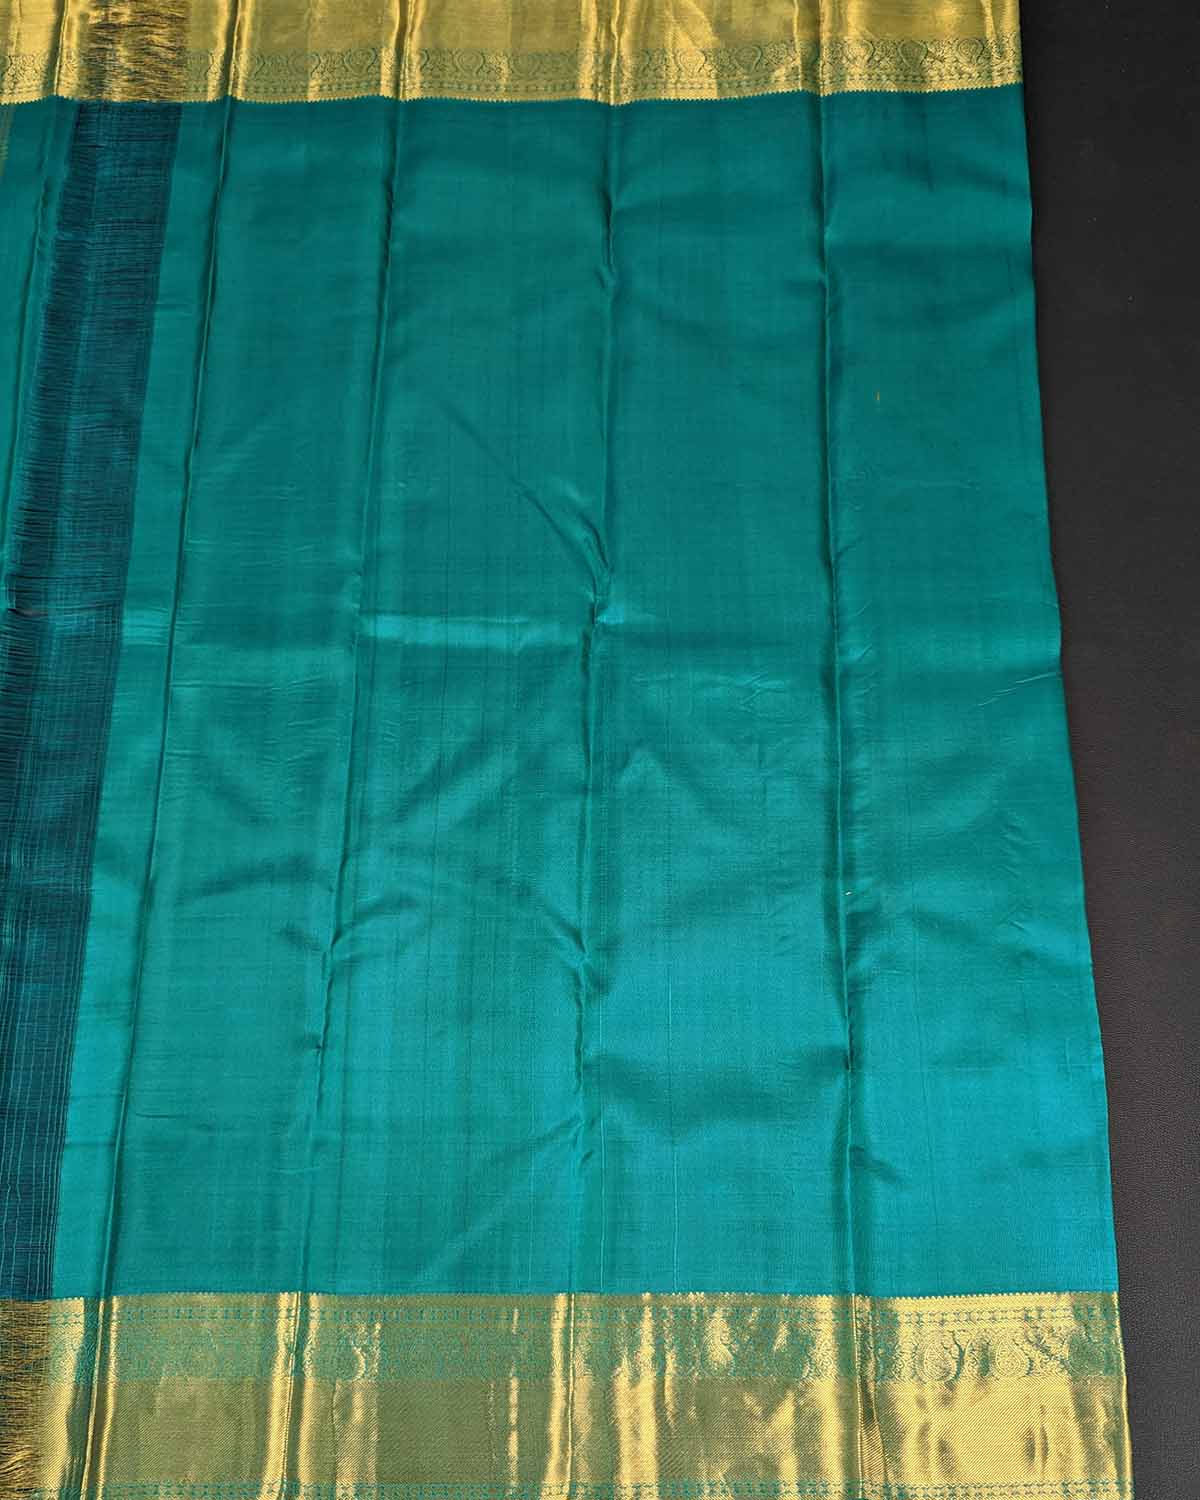 Chakra-Droplets Patterned Buttas Saree with Paisley Border